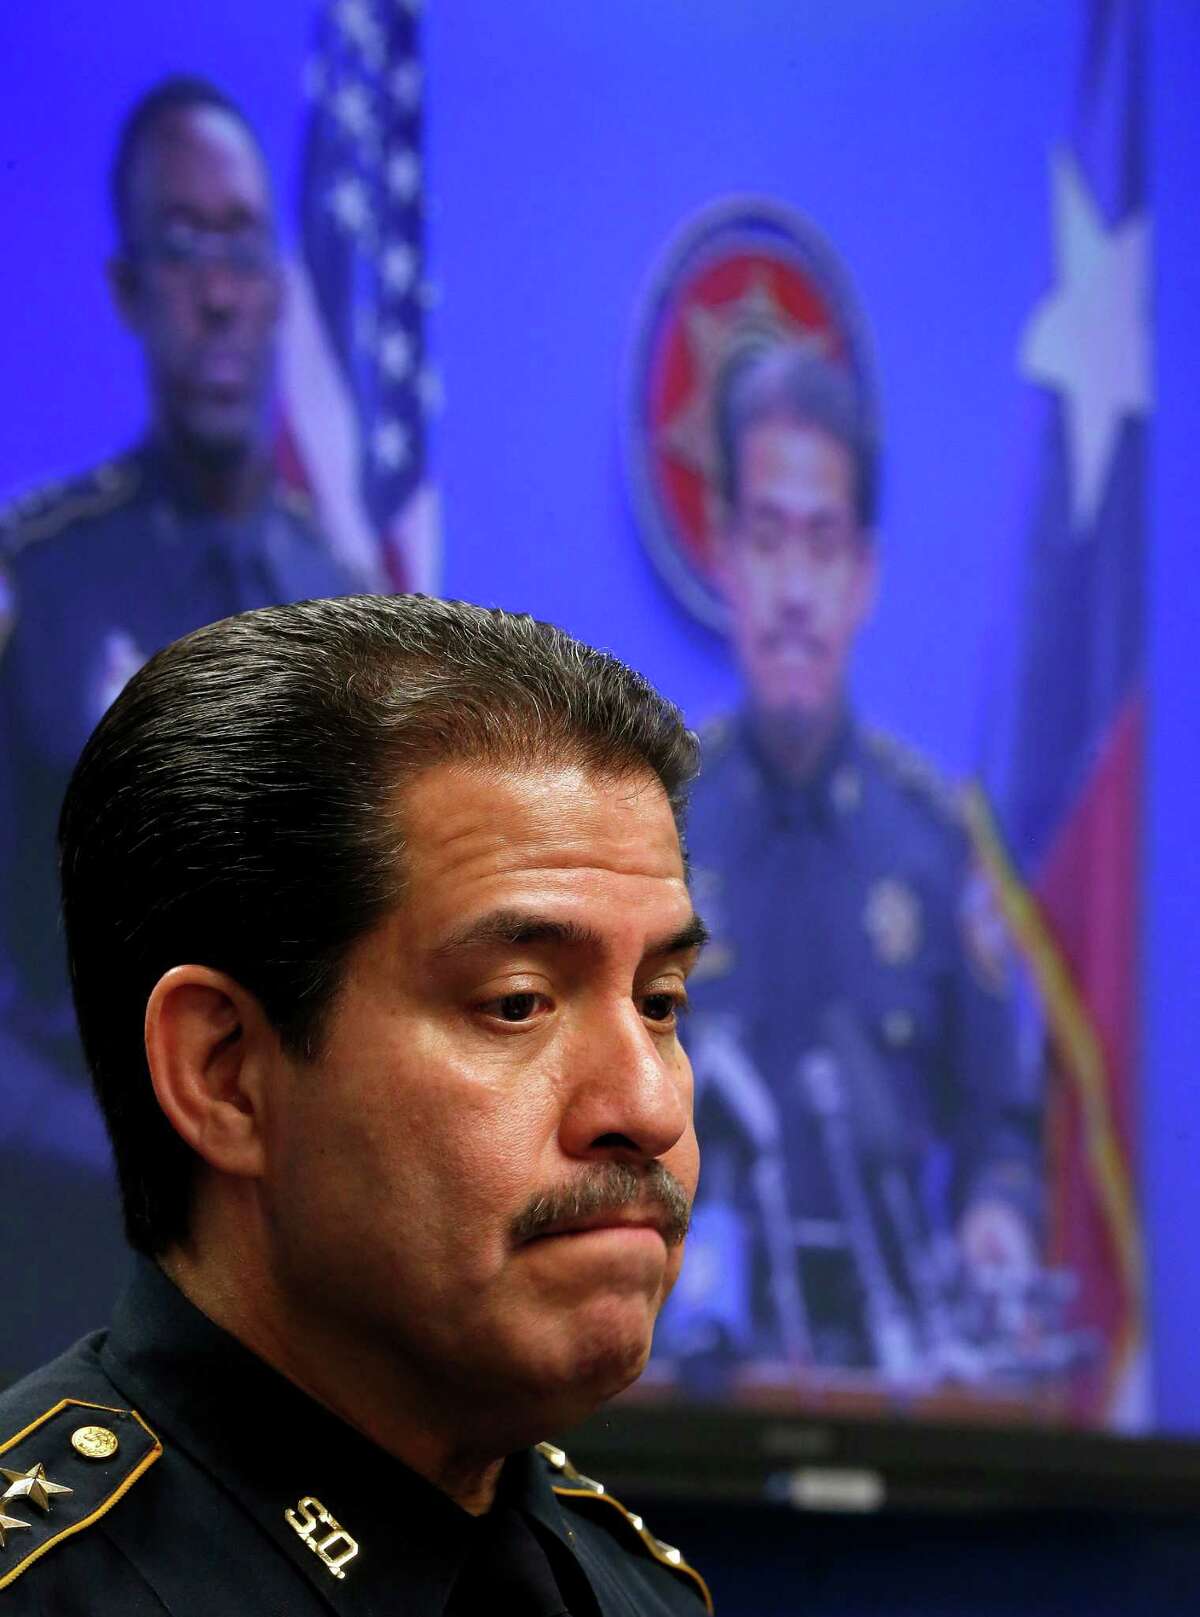 Harris County Sheriff Adrian Garcia announces during a press conference, Friday, April 24, 2015, in Houston, that he fired six jailers and suspended 29 other employees after an investigation revealed deplorable conditions in one cell where a mentally ill inmate was left unattended for weeks. ( Karen Warren / Houston Chronicle )